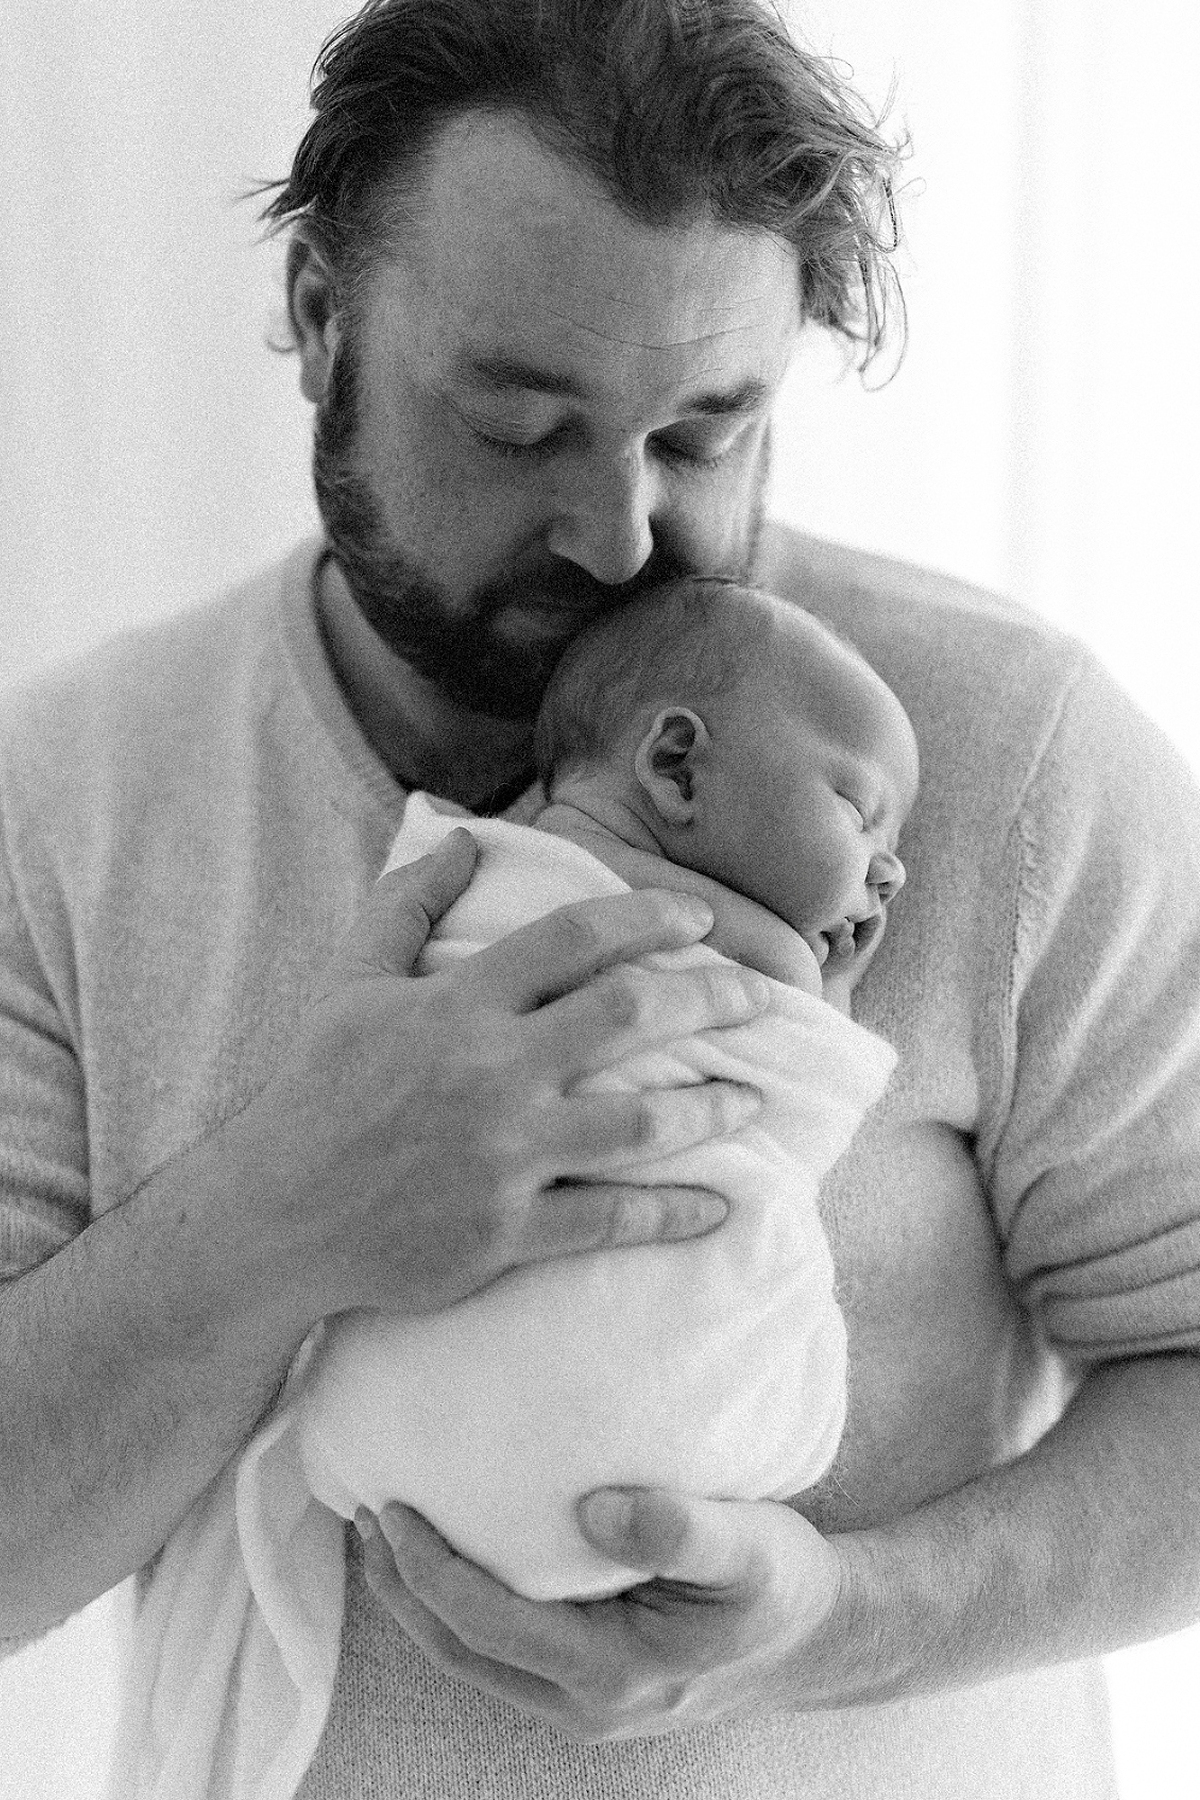 black and white image of a newborn baby being held by dad